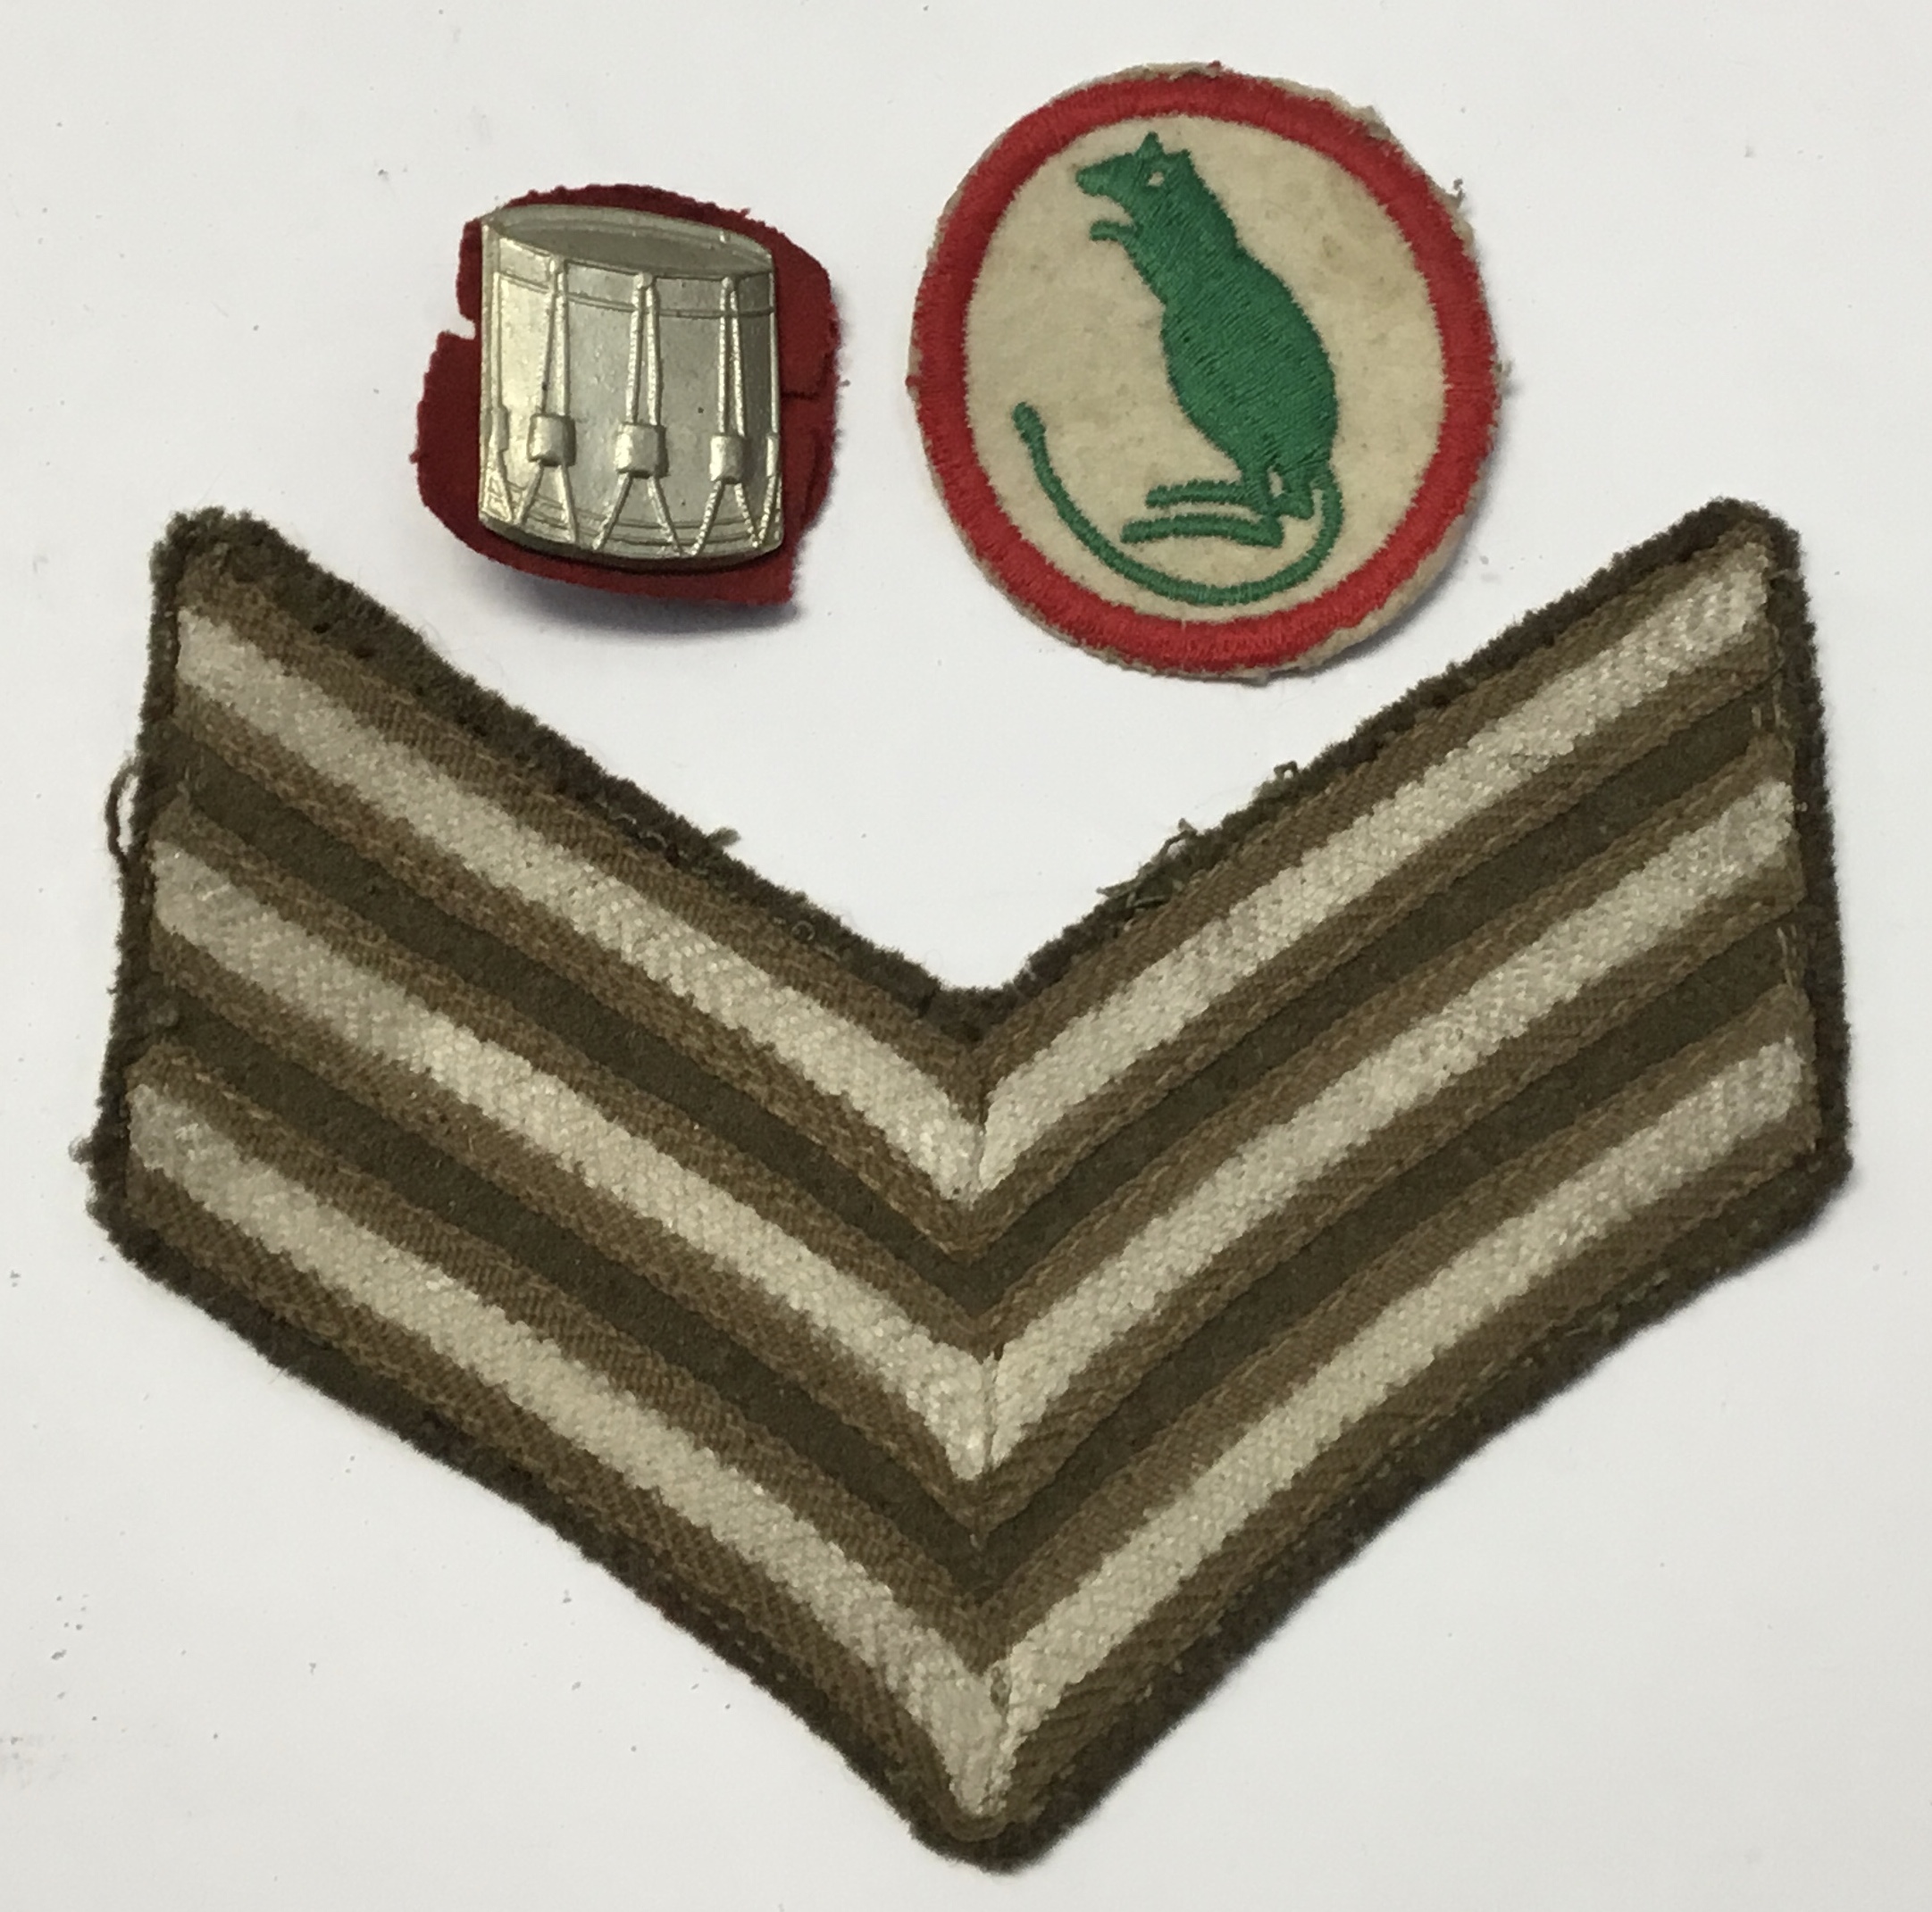 A selection of WW2 and post war badges and patches, plus other items related to Michael Fern of - Image 4 of 5